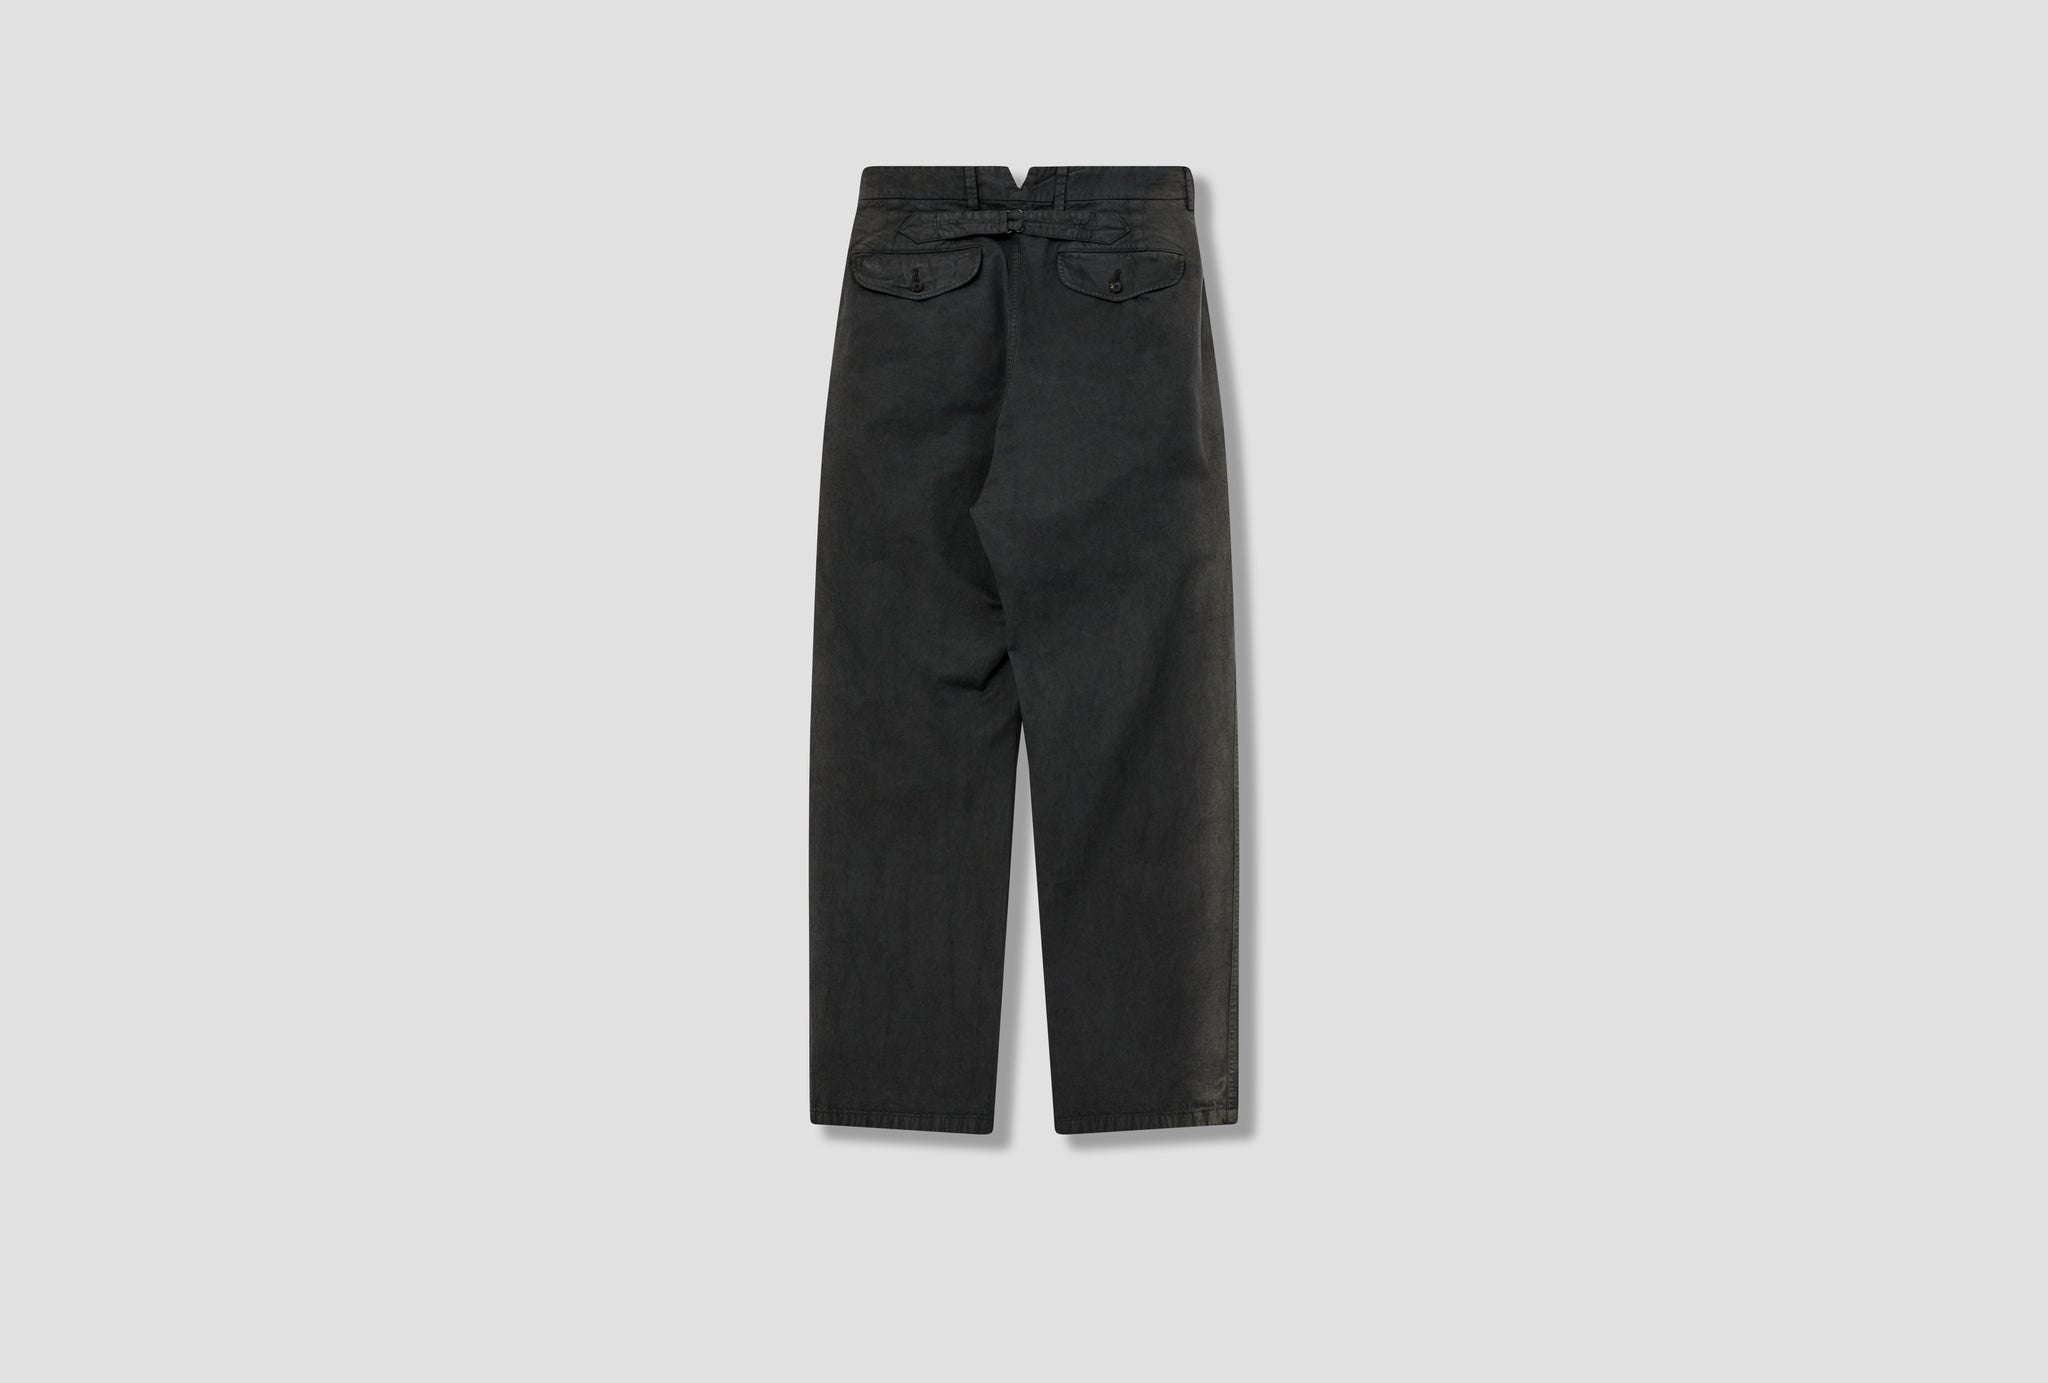 FINX NATURAL GABARDINE PRODUCT DYED PANTS A23SP02AT Black